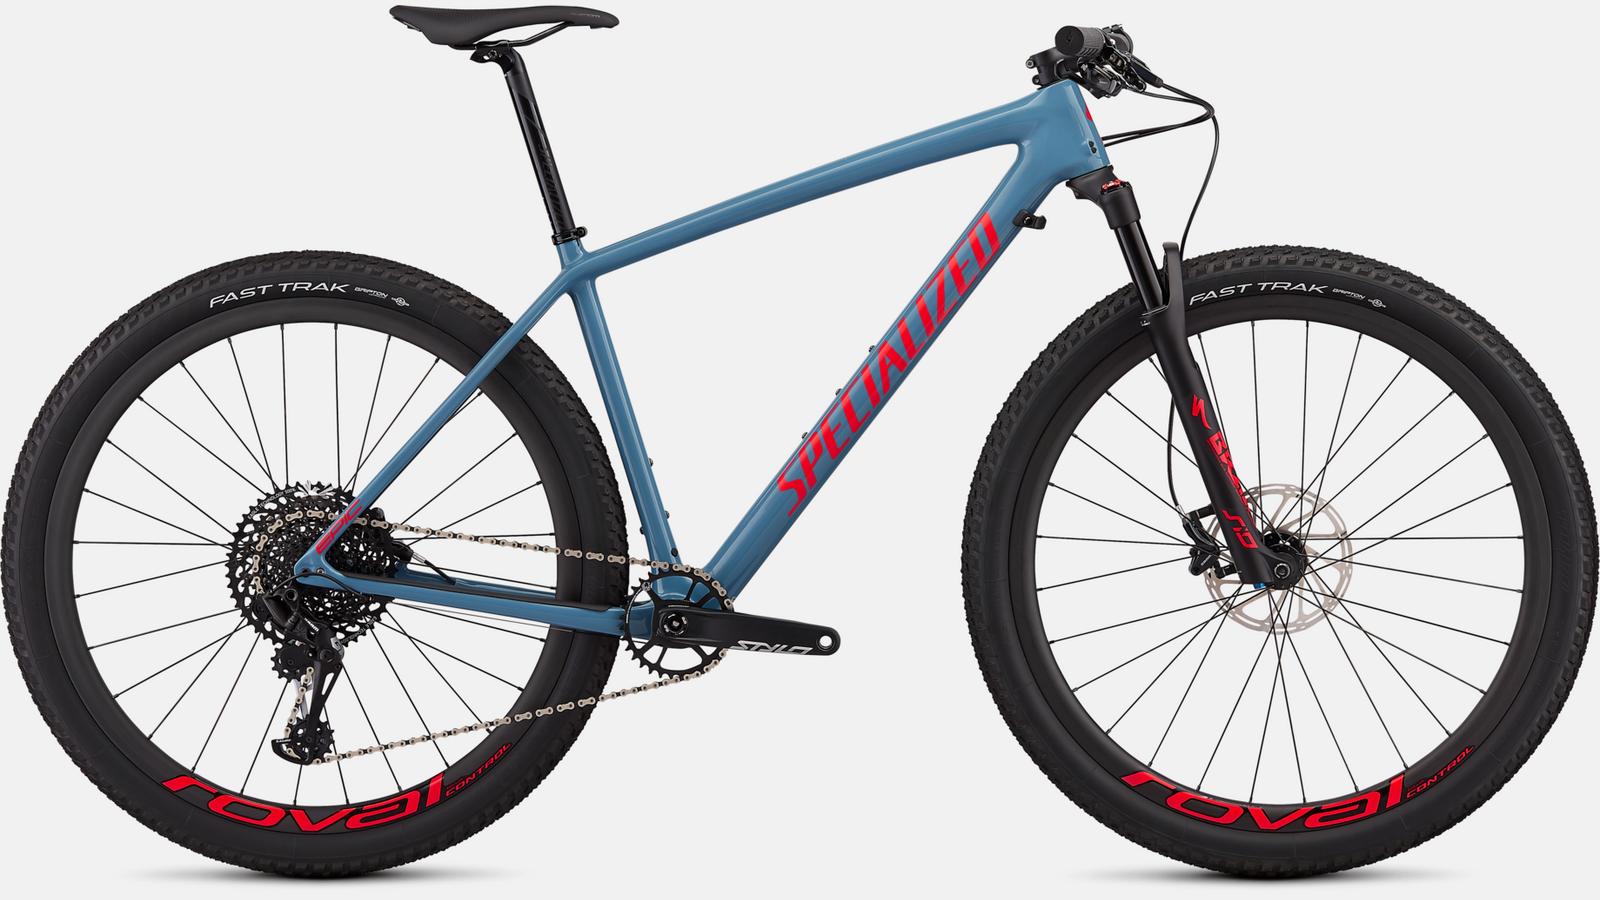 Paint for 2019 Specialized Epic Hardtail Expert - Gloss Storm Grey